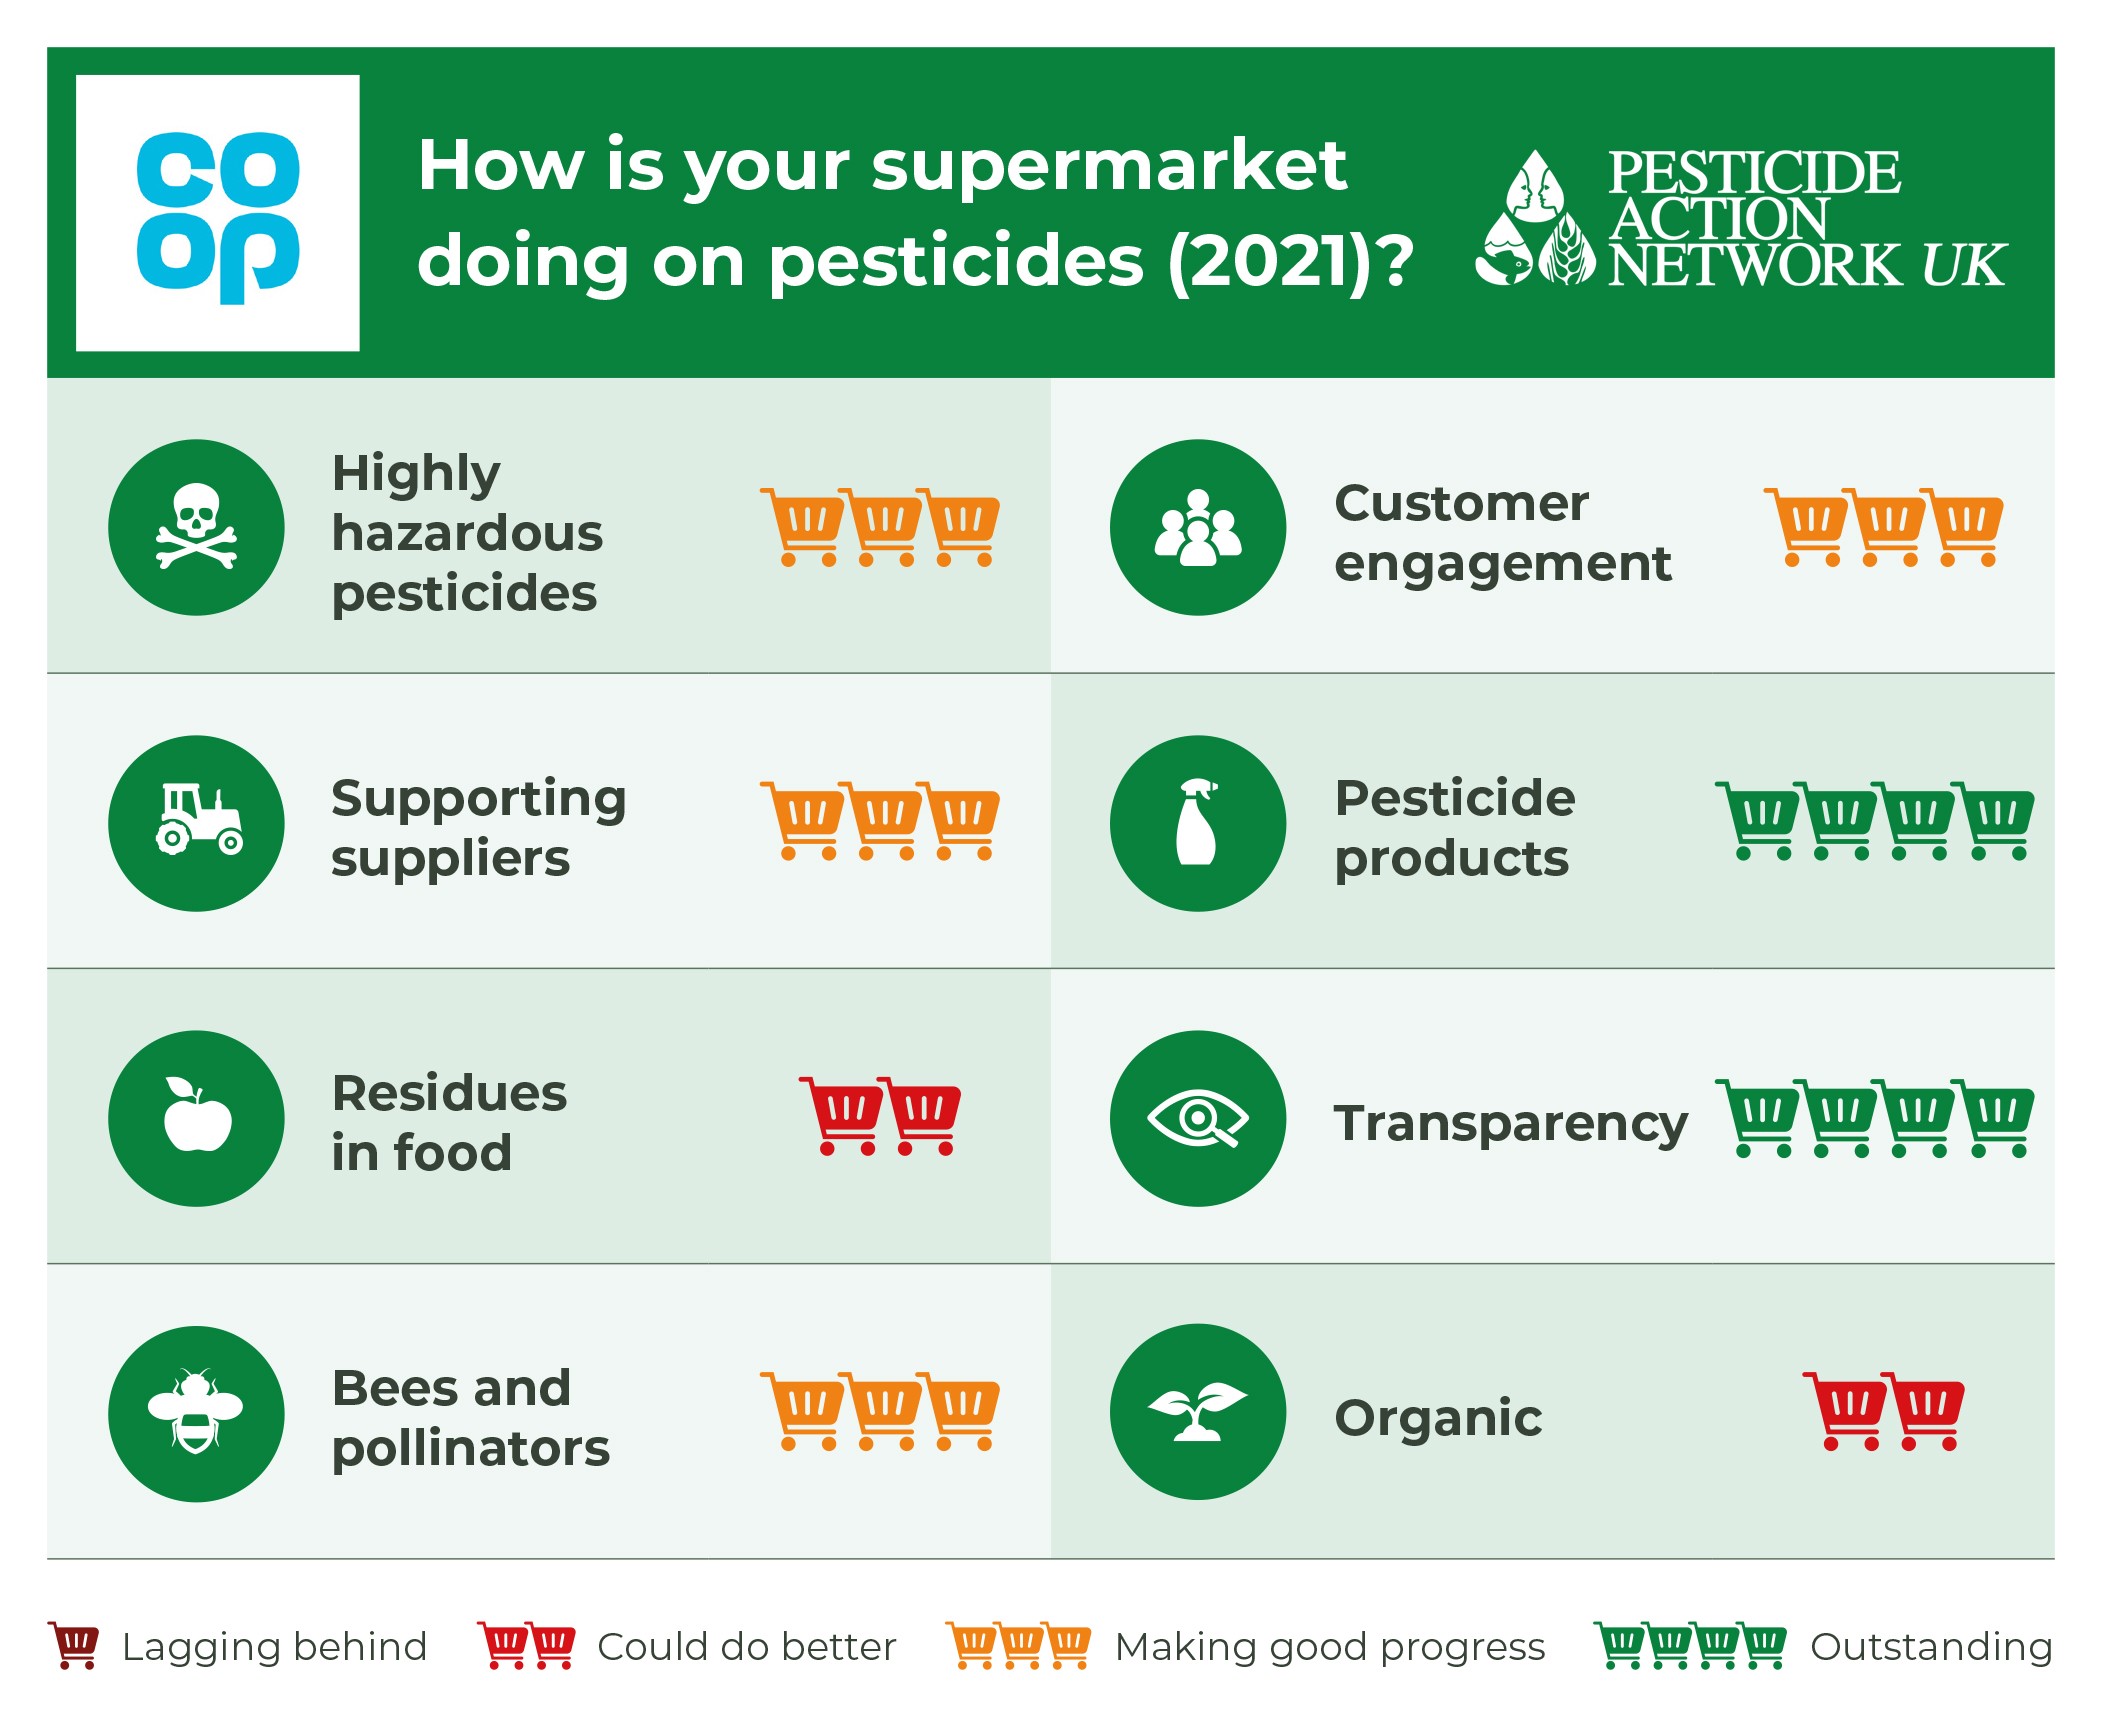 How is Co-op doing on pesticides?